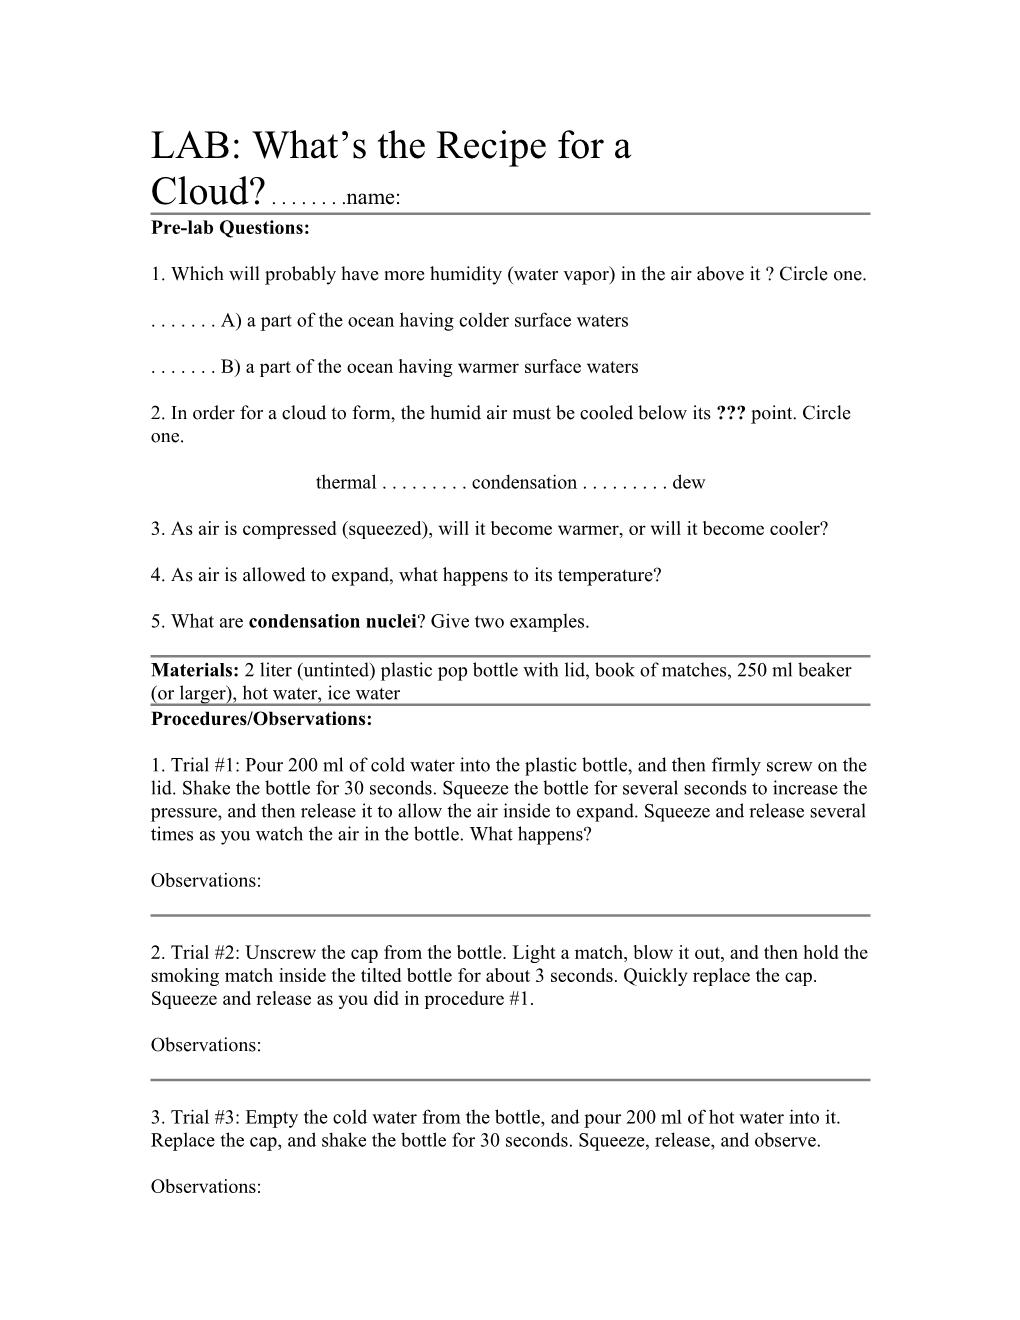 LAB: What S the Recipe for a Cloud